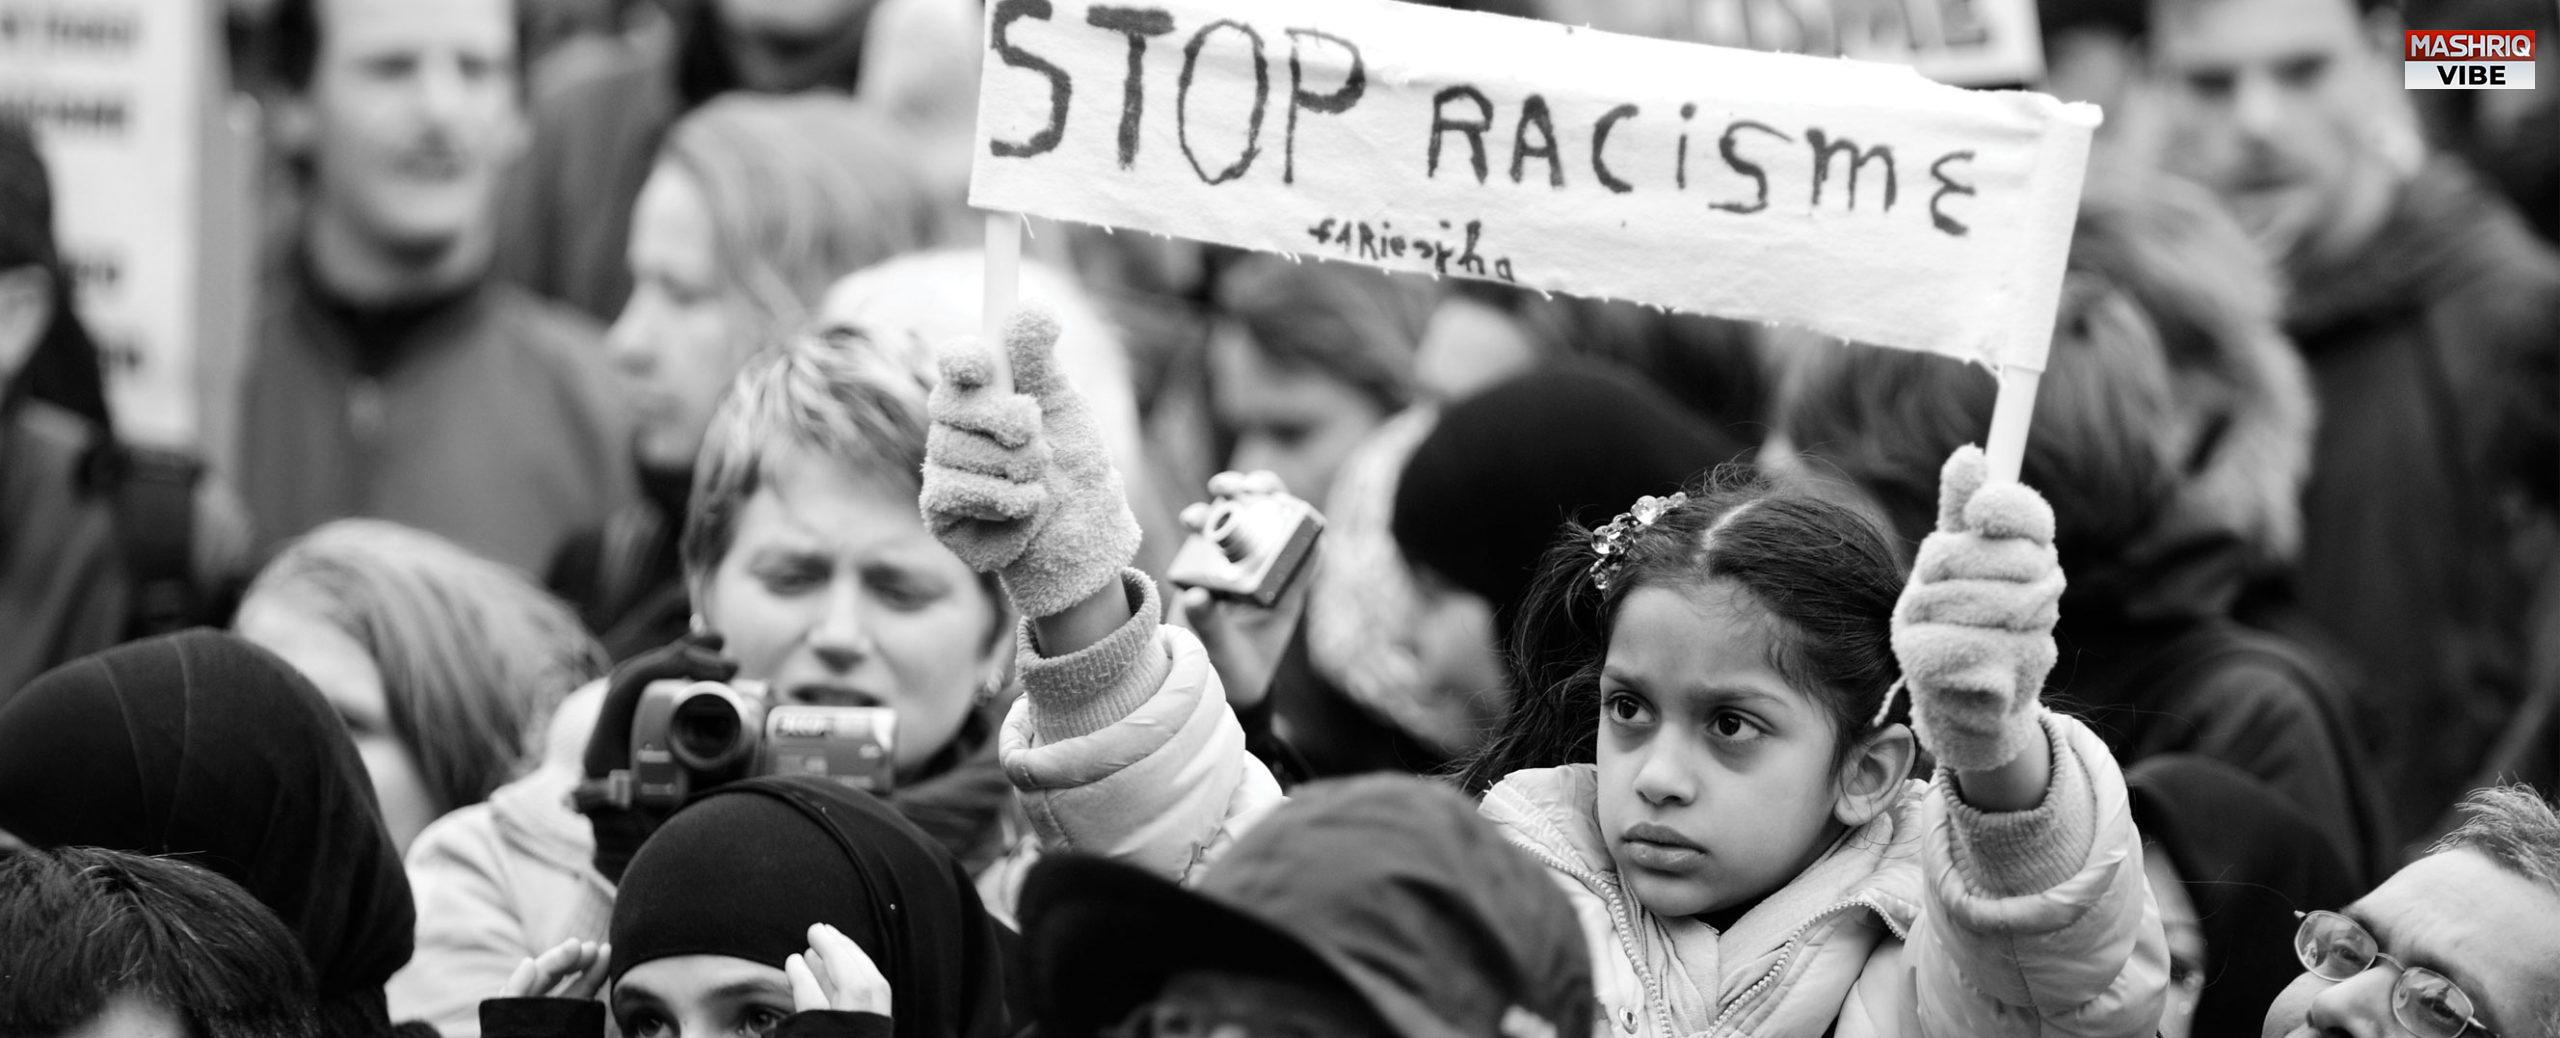 Racism, discrimination against children rife in countries worldwide